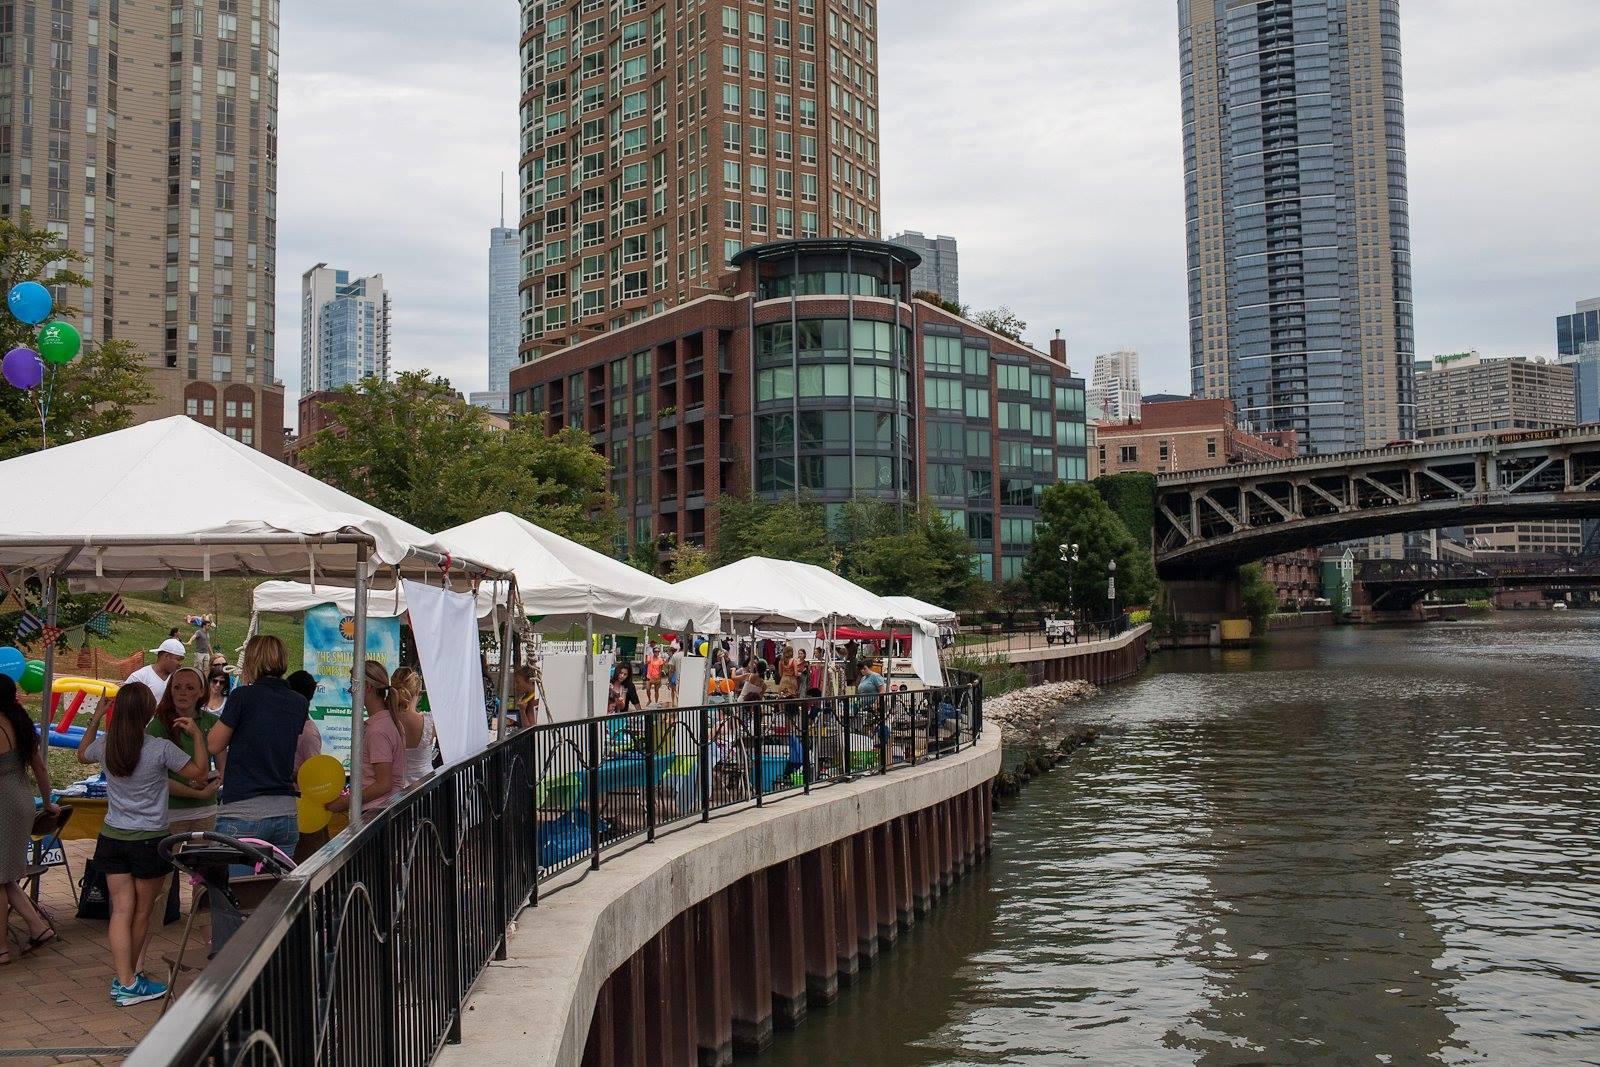 The 15th annual Taste of River North features food, music and art. (Courtesy Taste of River North)